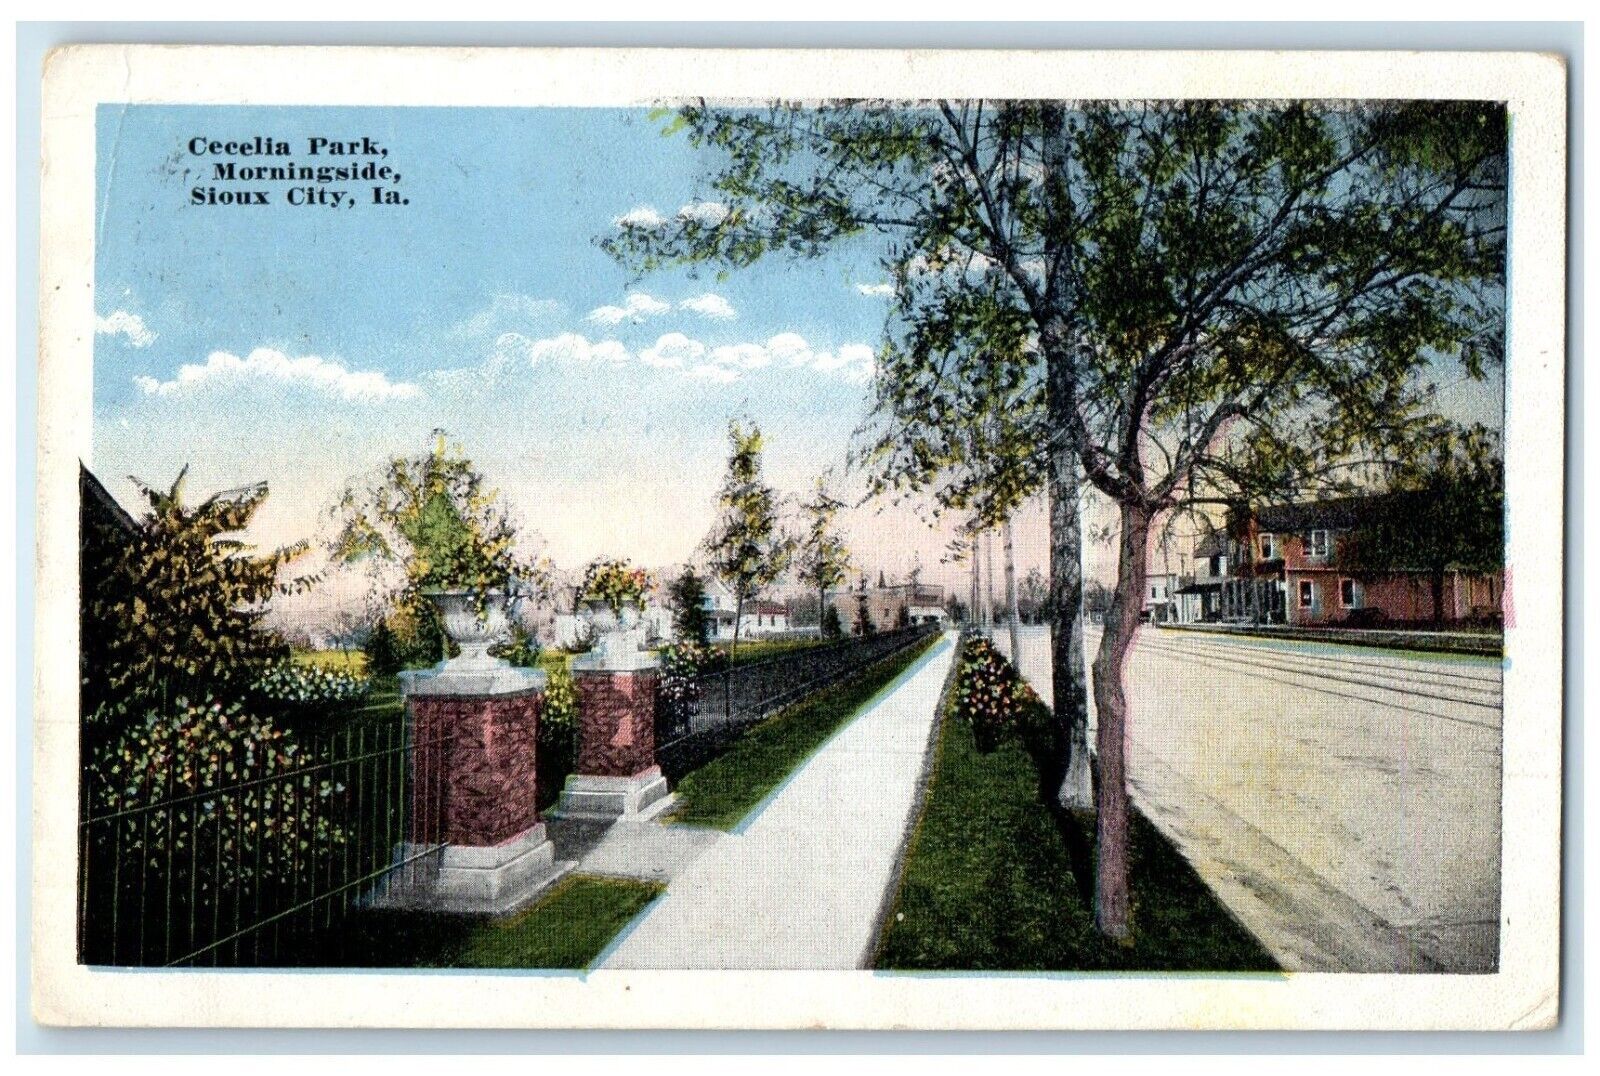 1916 View Of Cecelia Park Morningside Sioux City Iowa IA Posted Antique Postcard